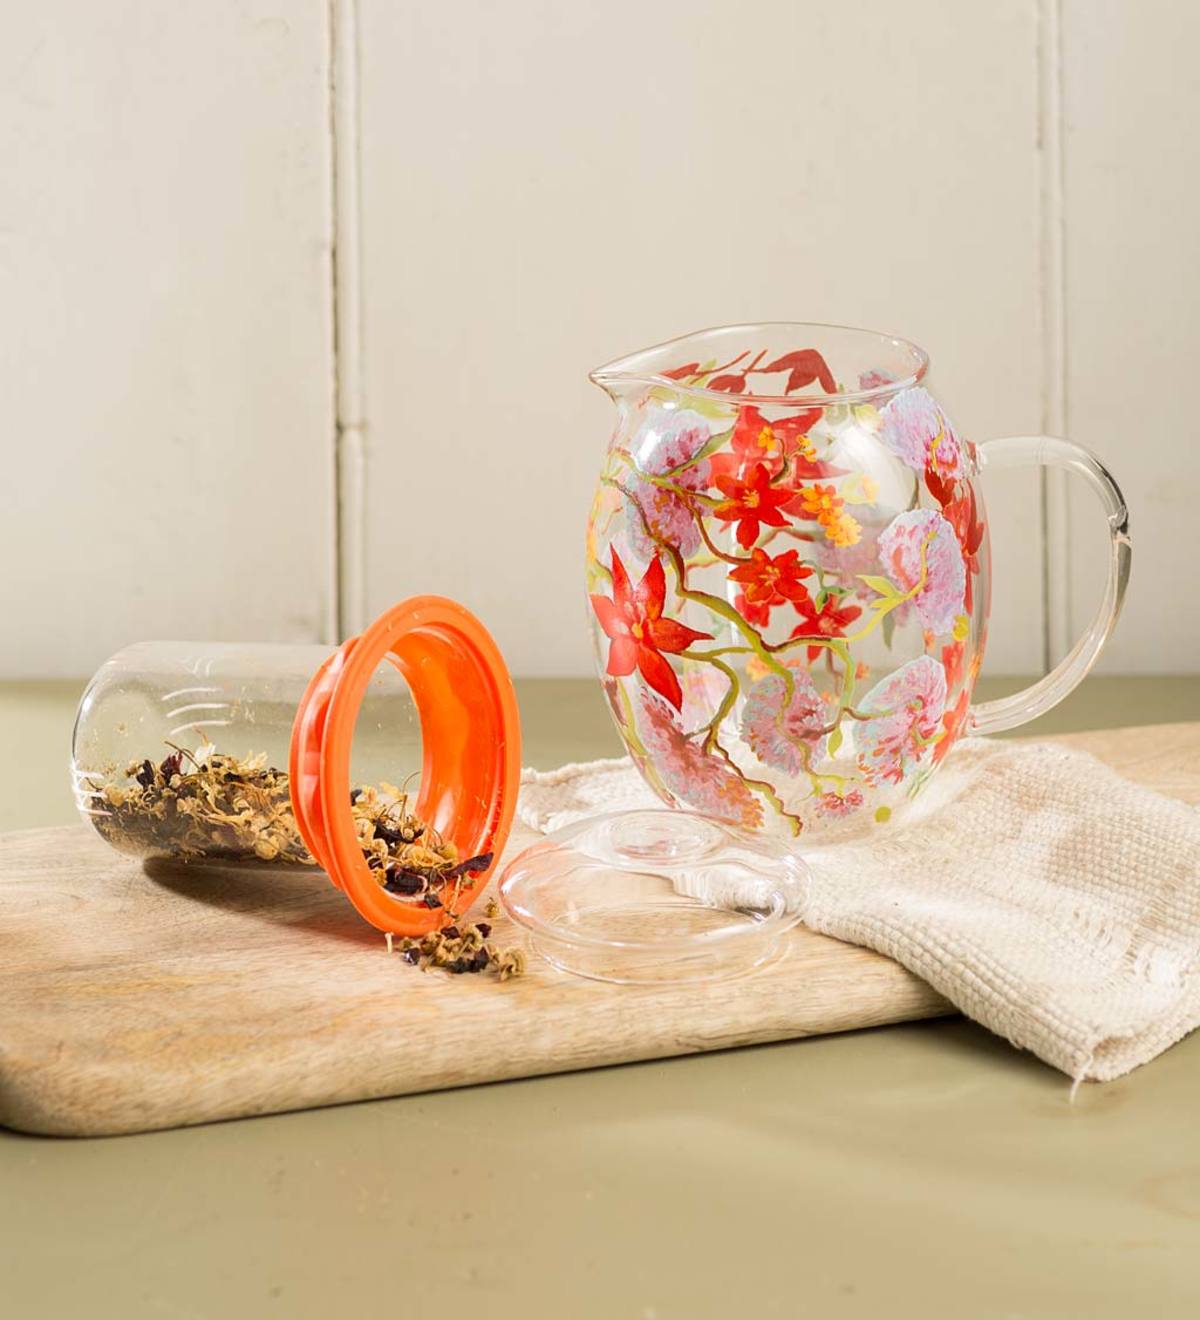 27 oz. Glass Teapot with Floral Design